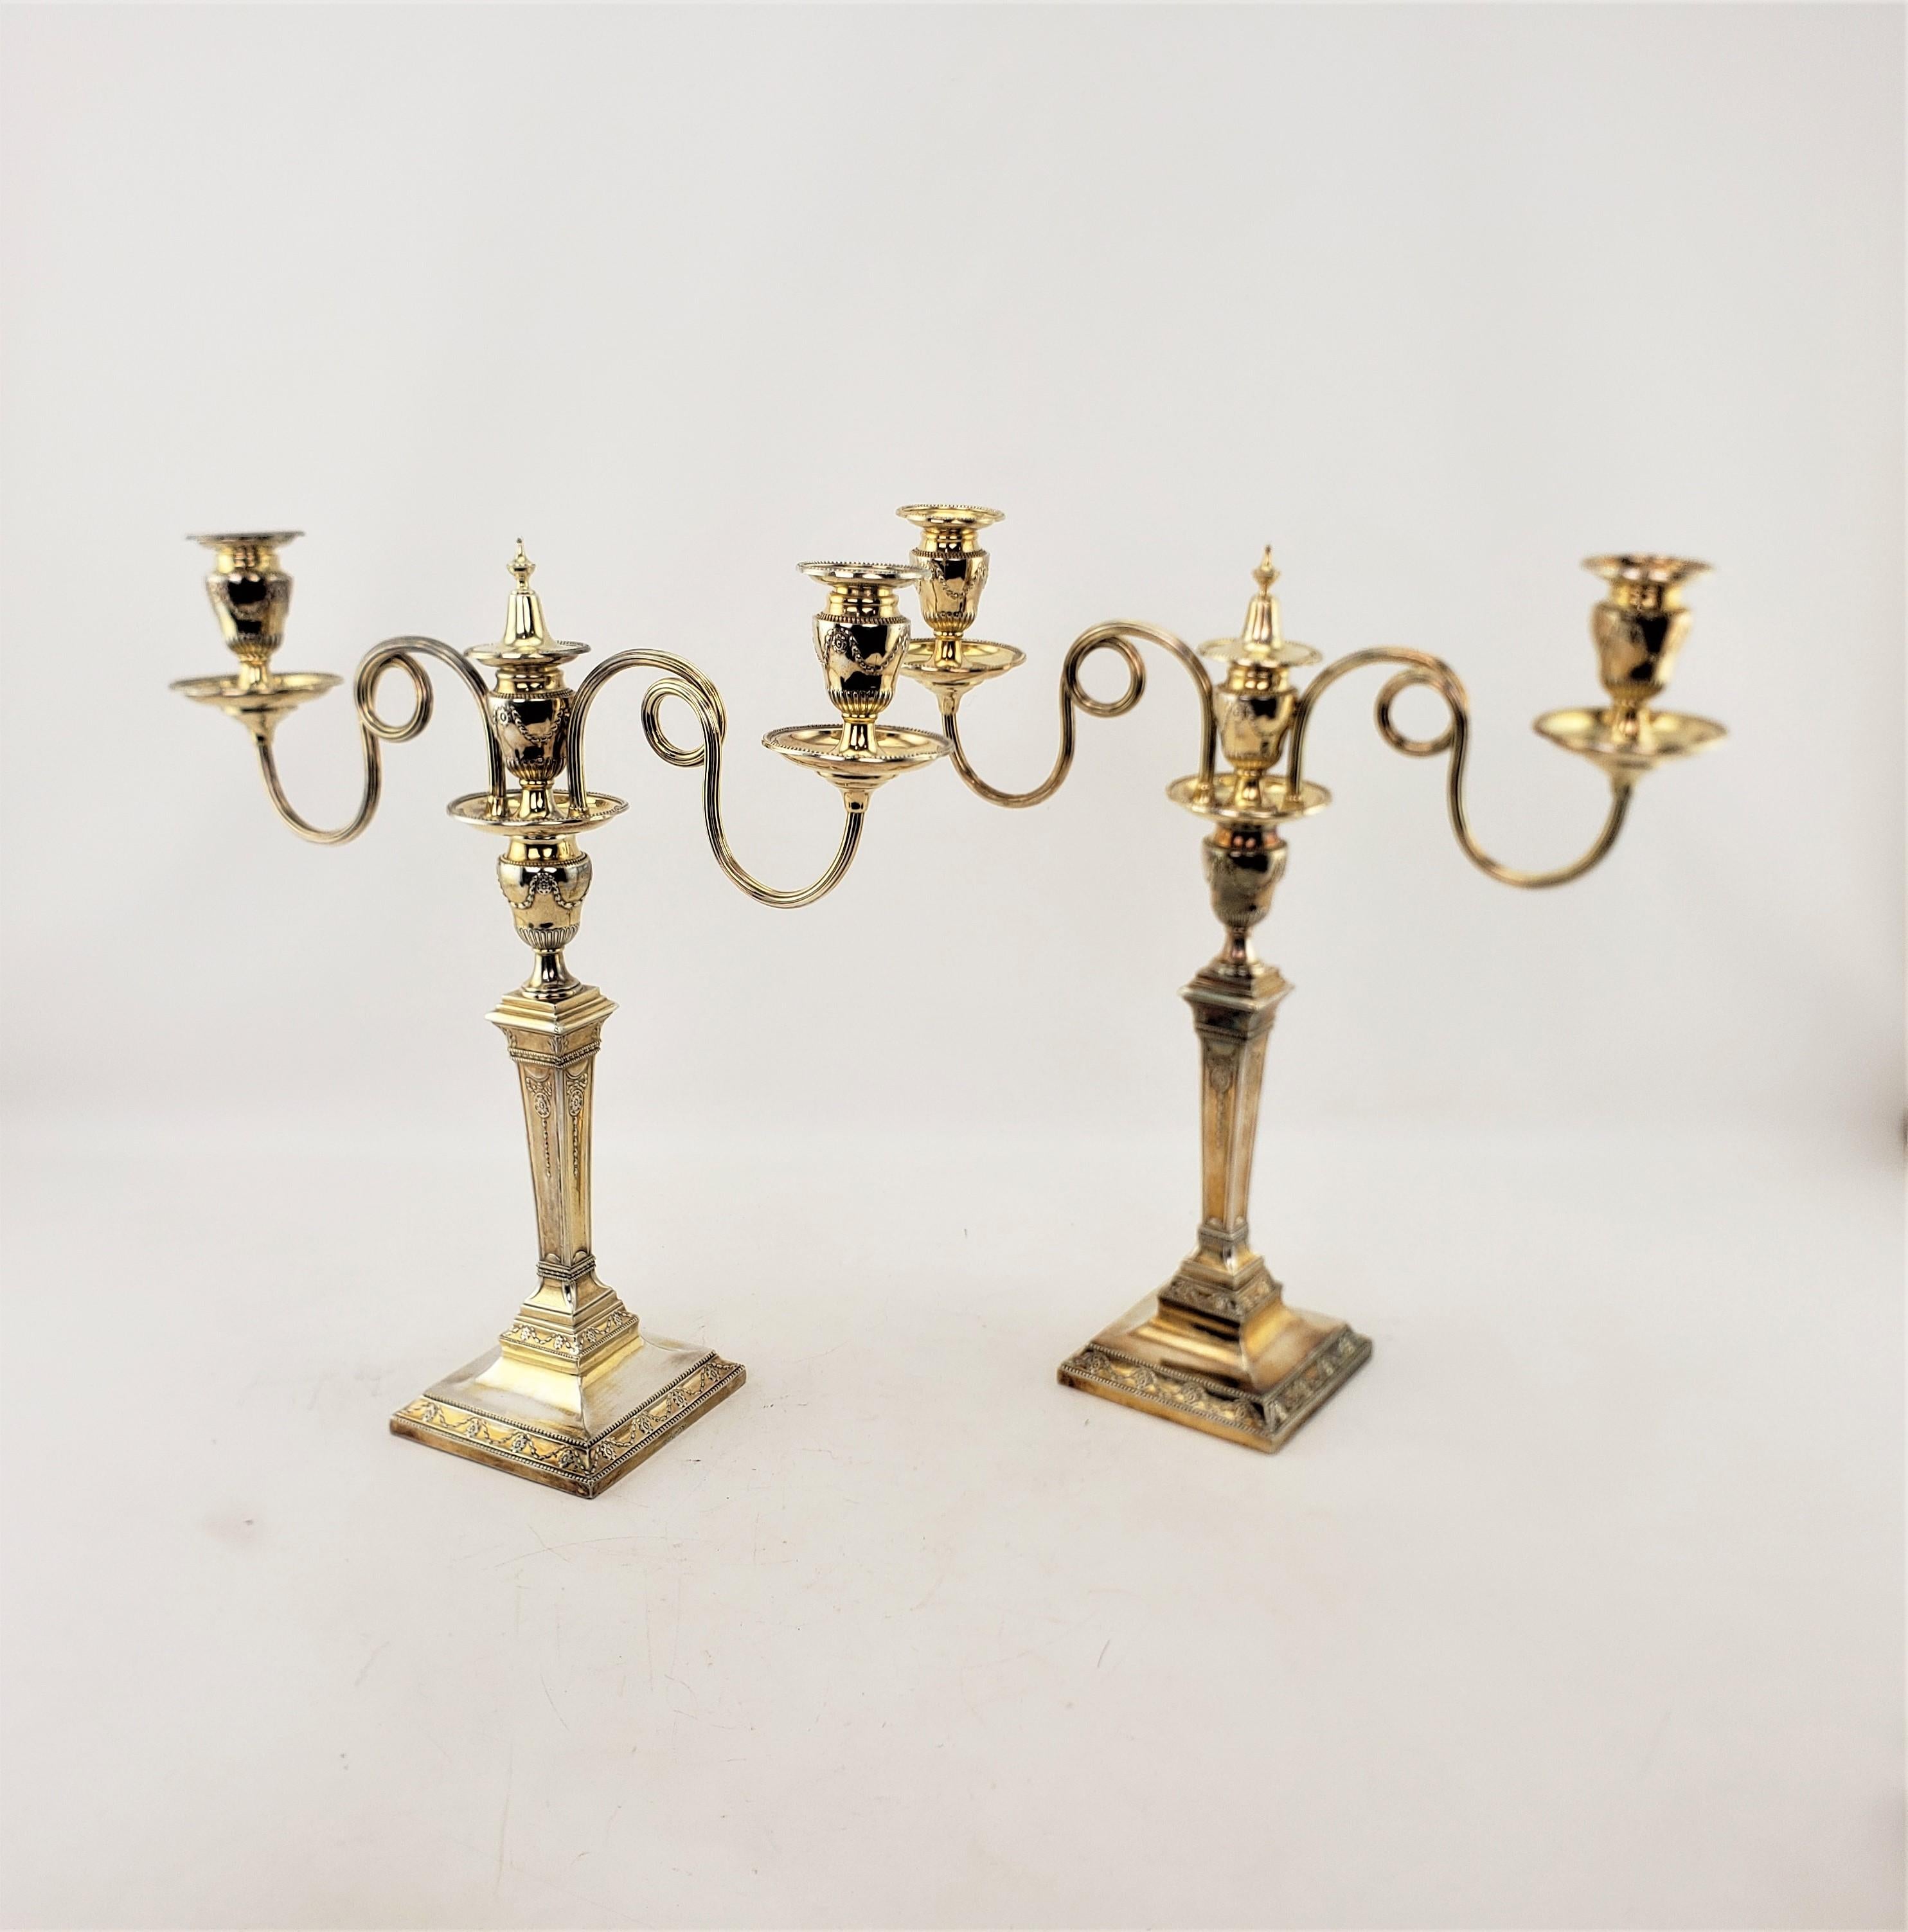 This pair of antique convertible candelabras were made by the well known Mappin & Webb of England in approximately 1900 in the period Edwardian style. The candelabras are composed of silver plate with a gilt finish and decorated with a stylized